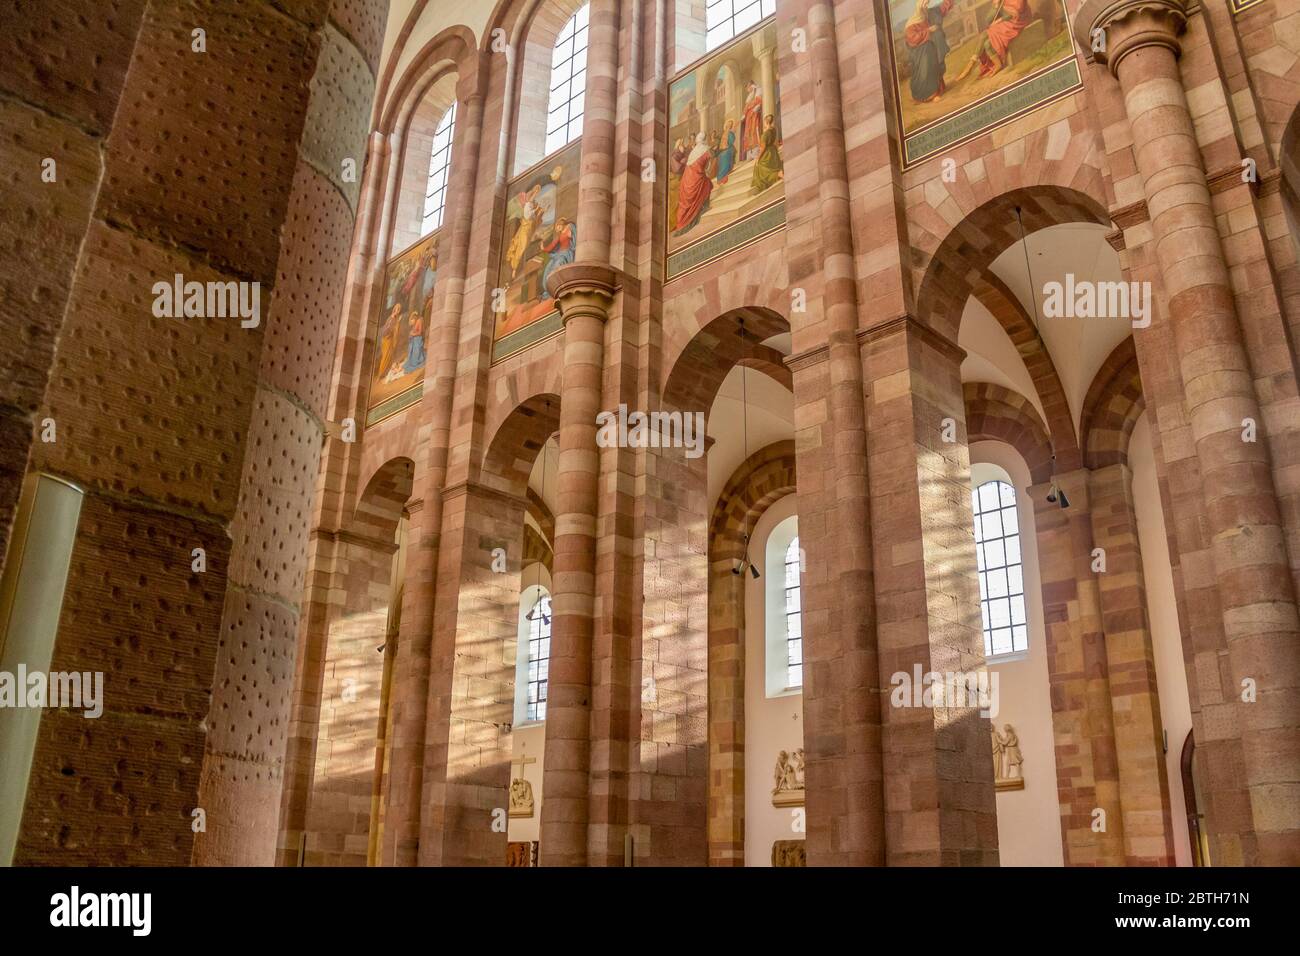 scenery inside of the Speyer Cathedral located in Speyer, Germany Stock Photo